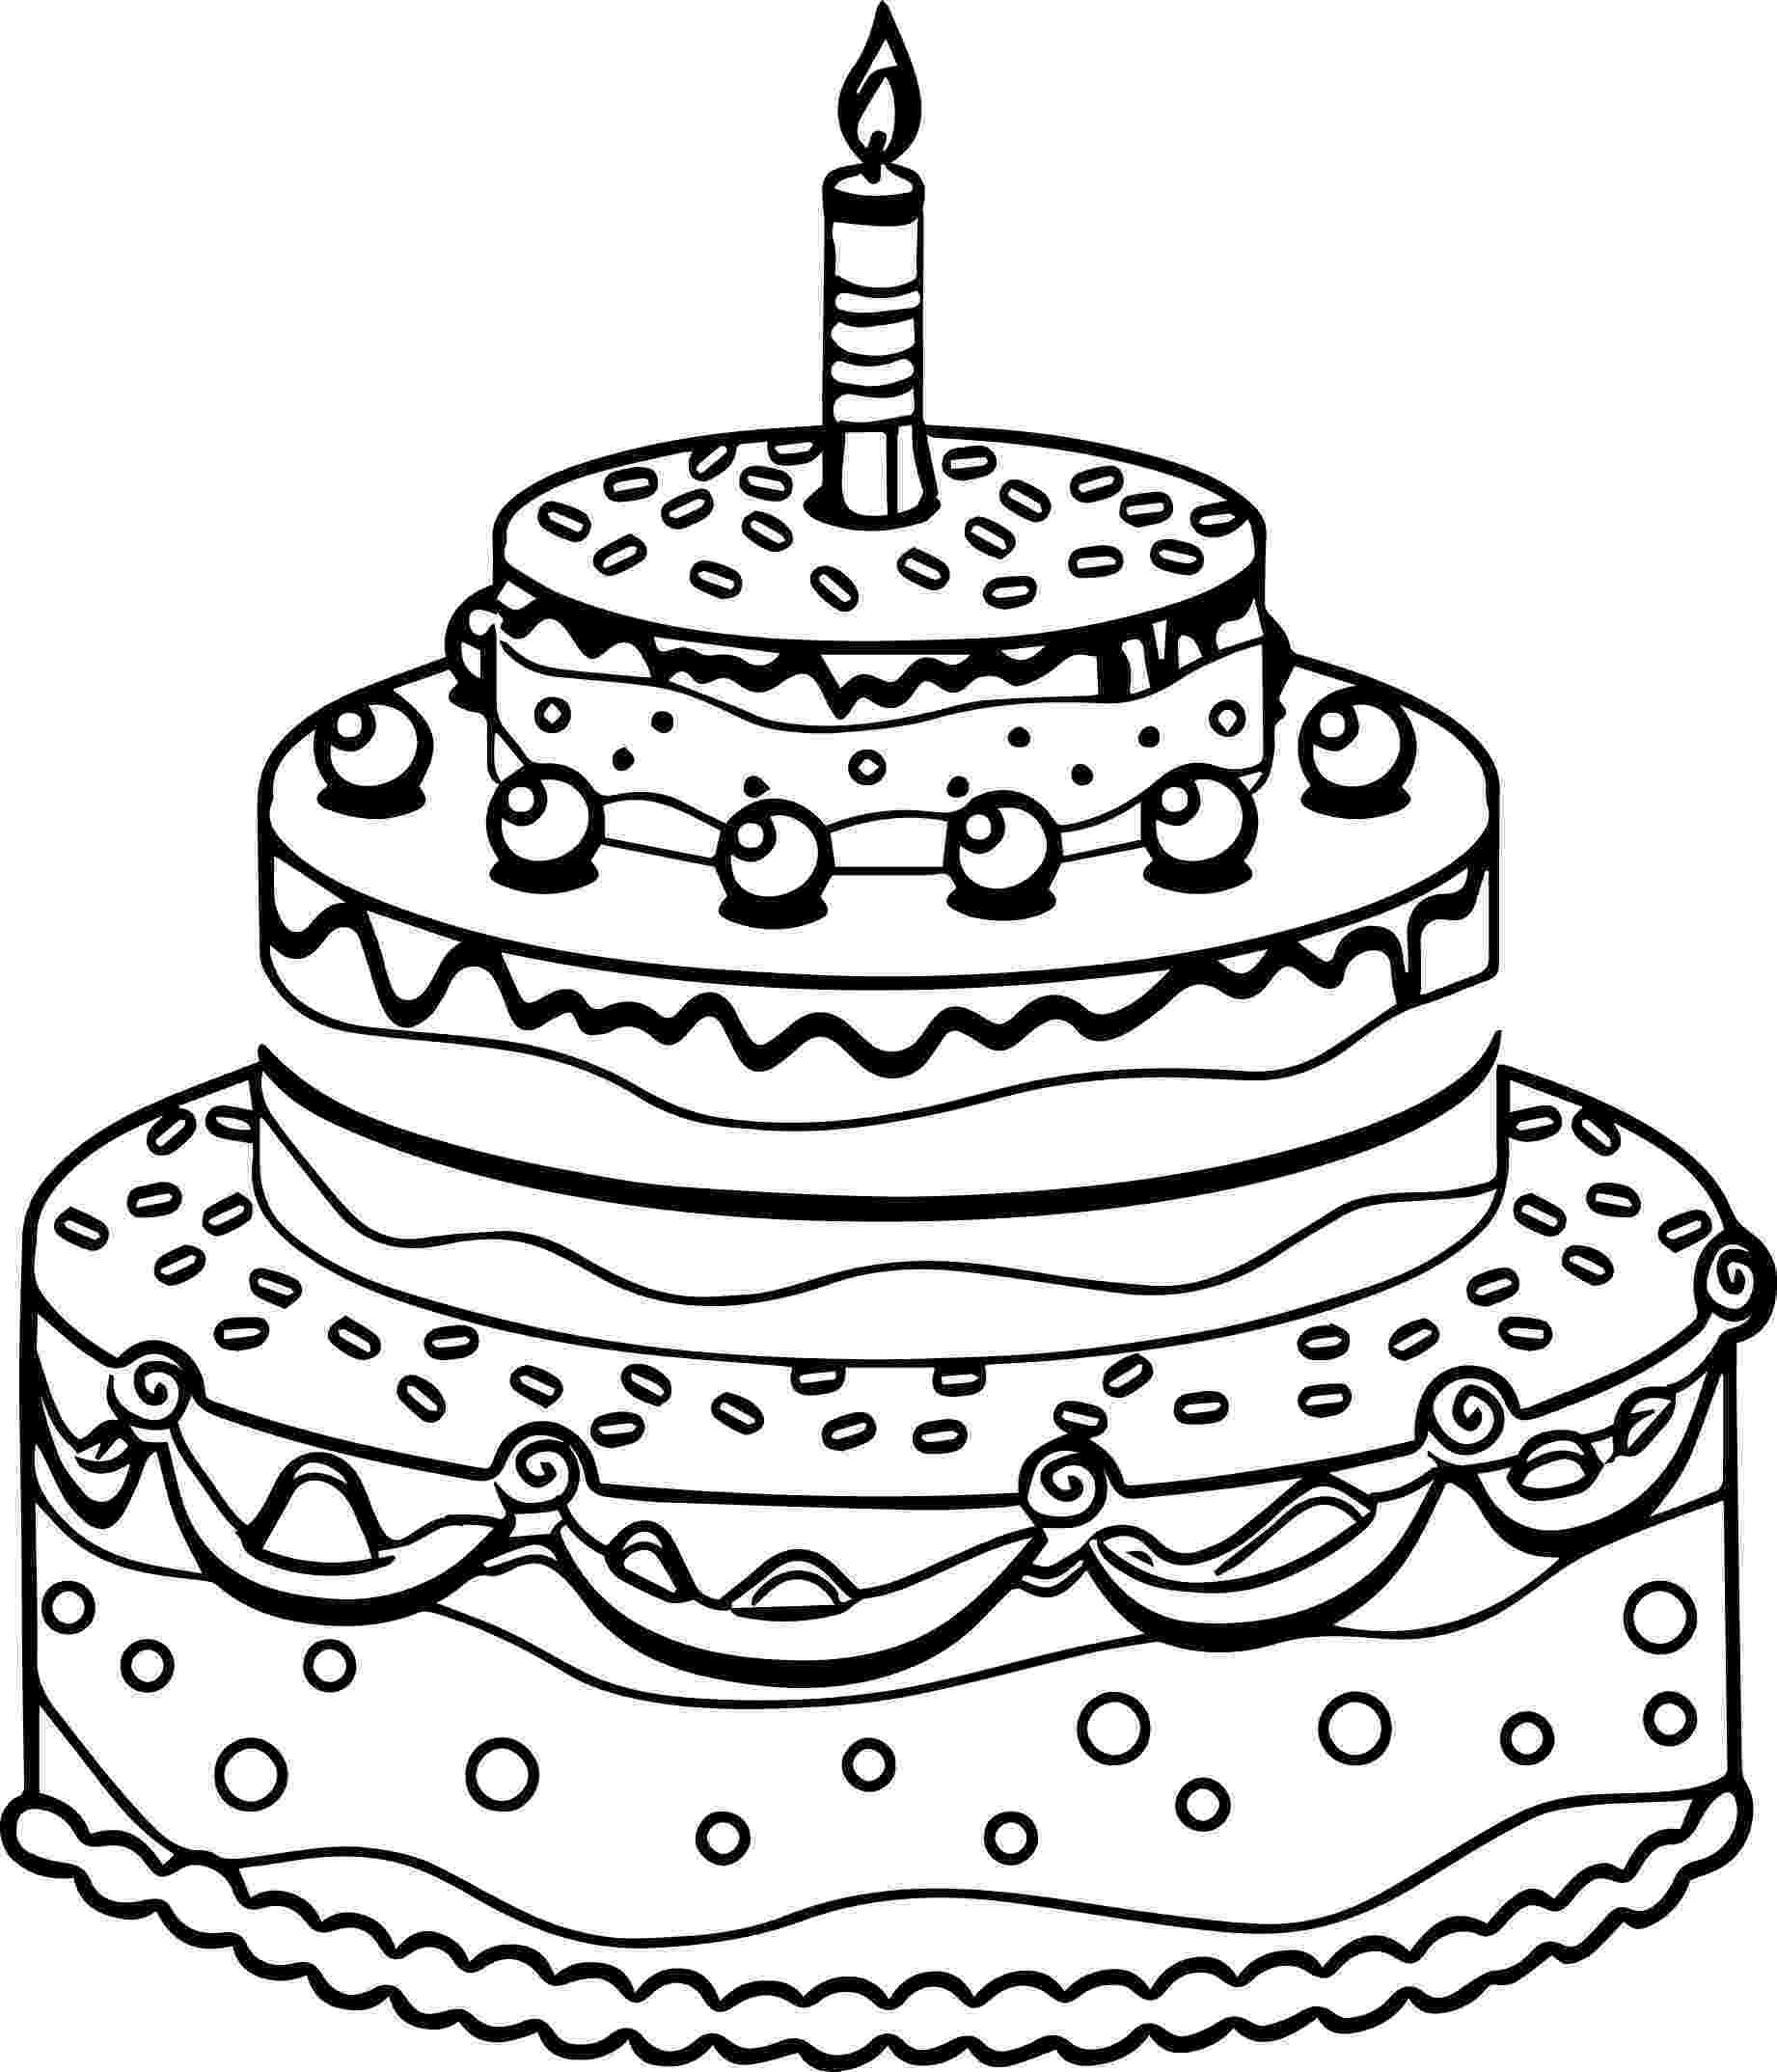 coloring pages cake birthday cake coloring pages hellokidscom coloring pages cake 